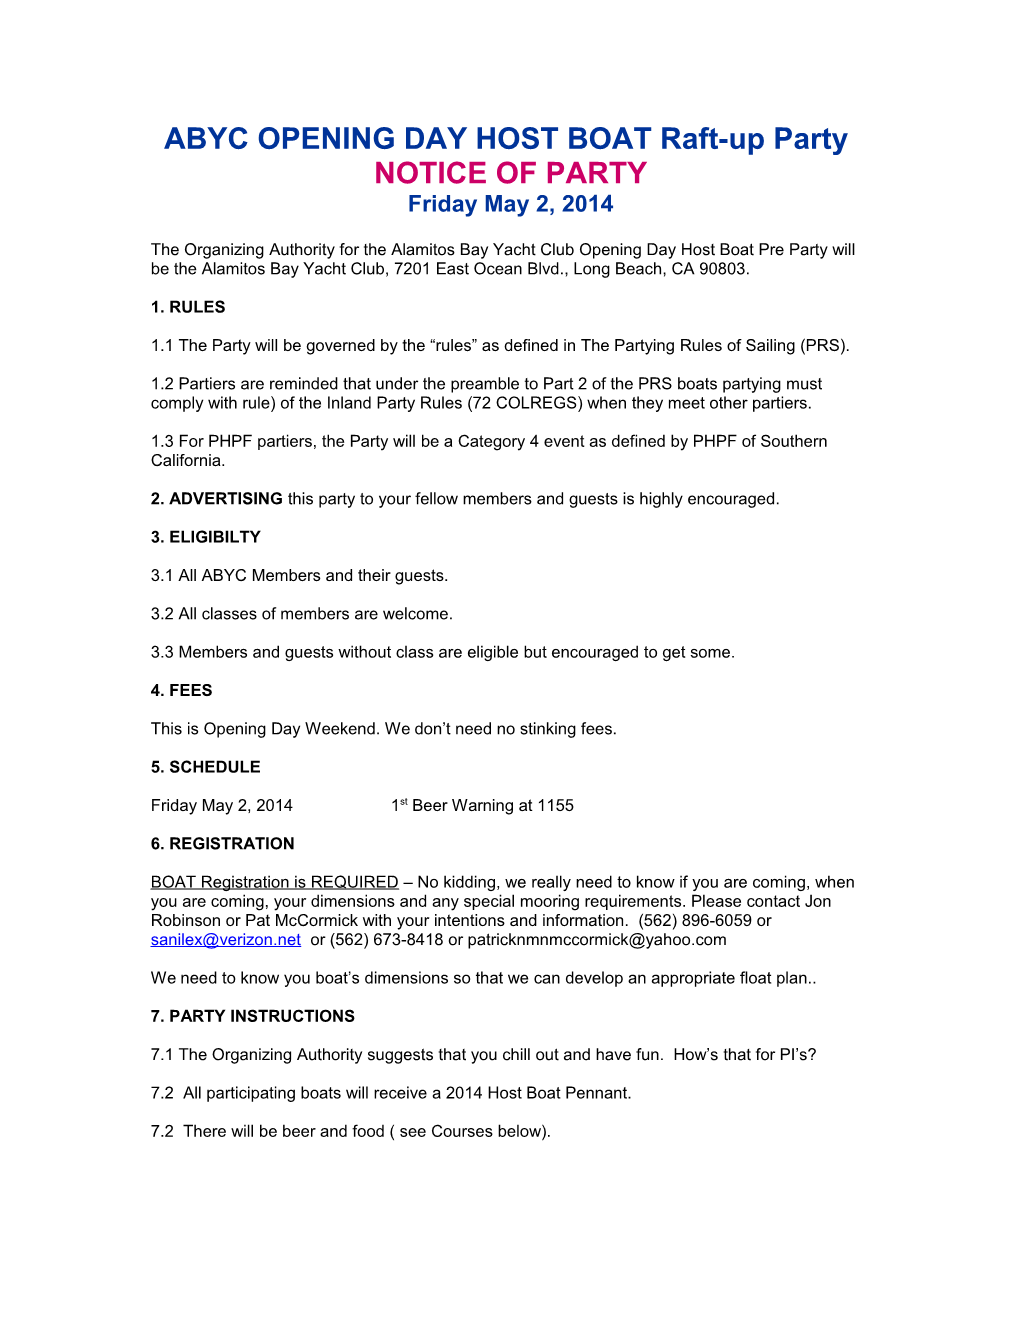 Notice of Party